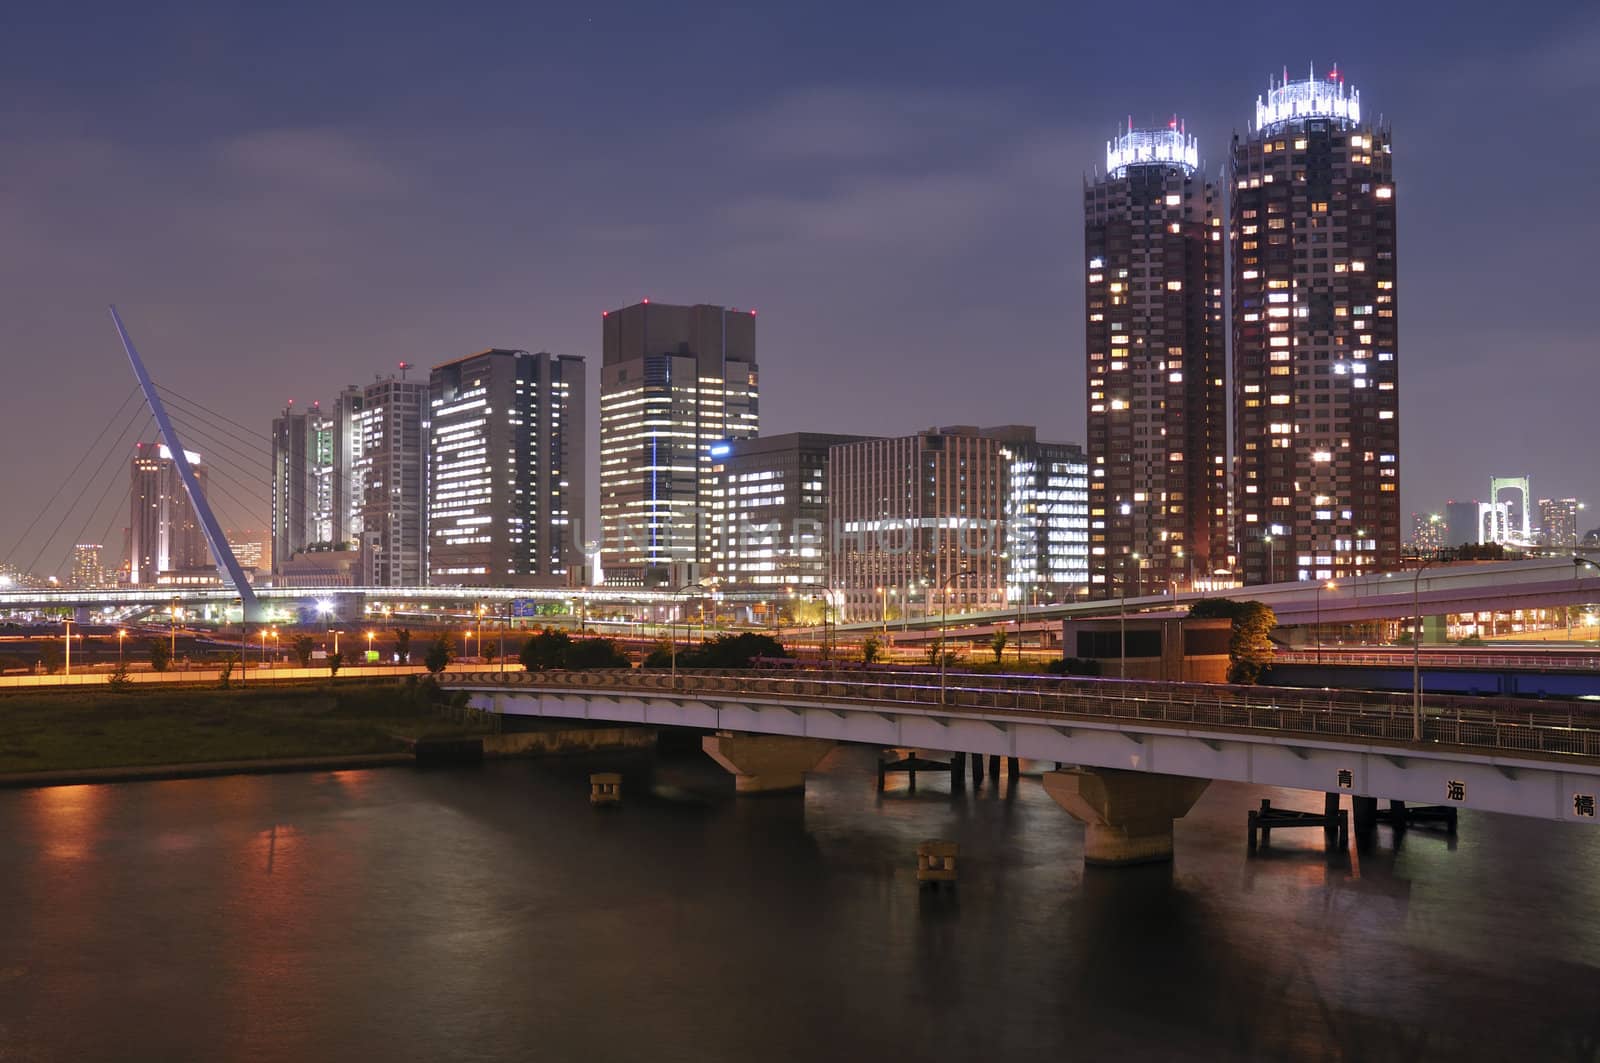 modern buildings of Odaiba district  in Tokyo Japan well illuminated by night